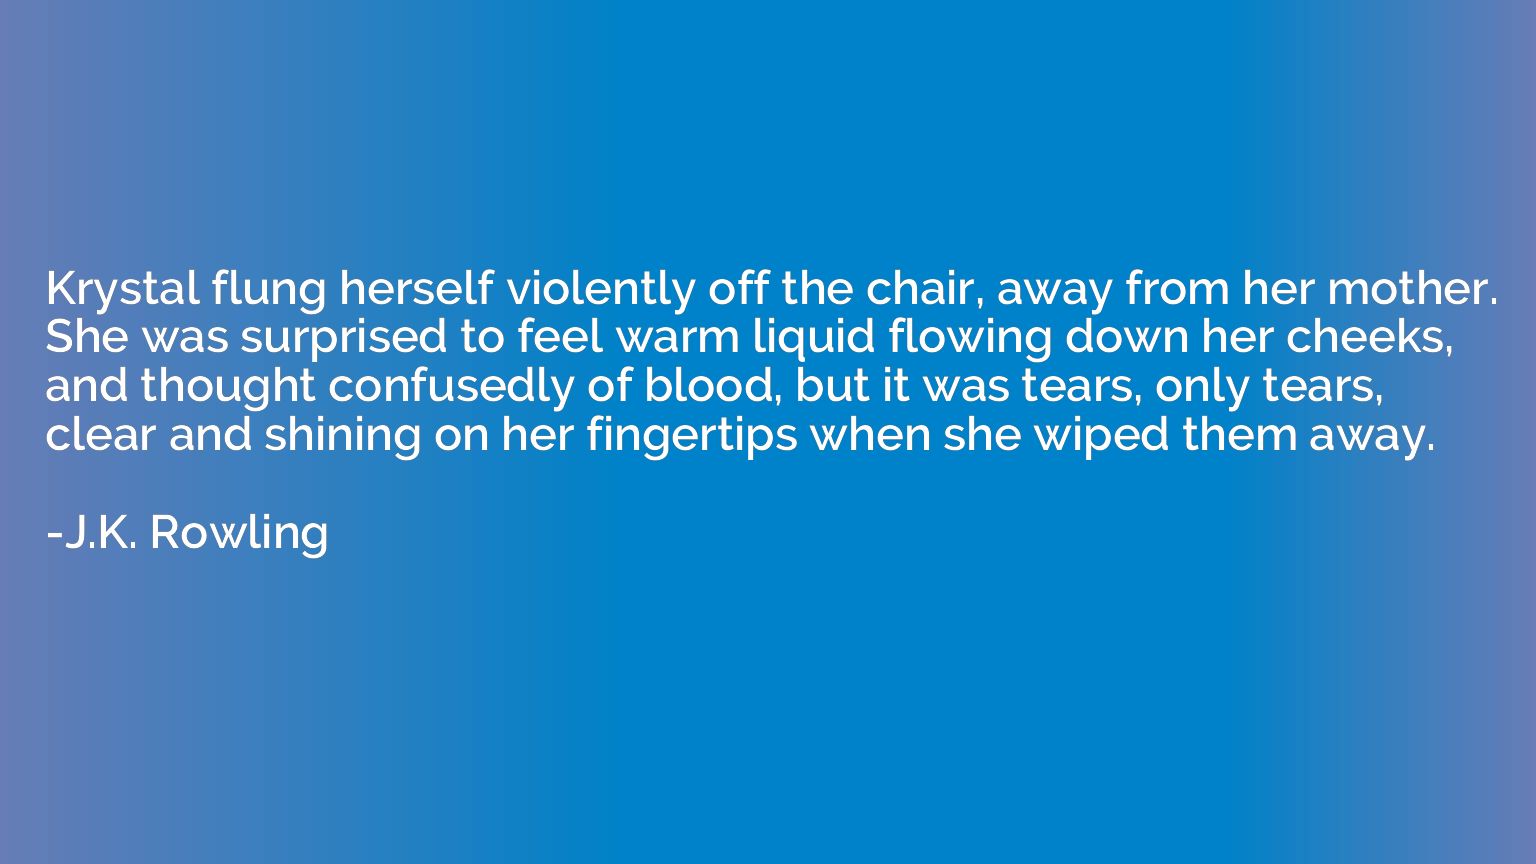 Krystal flung herself violently off the chair, away from her